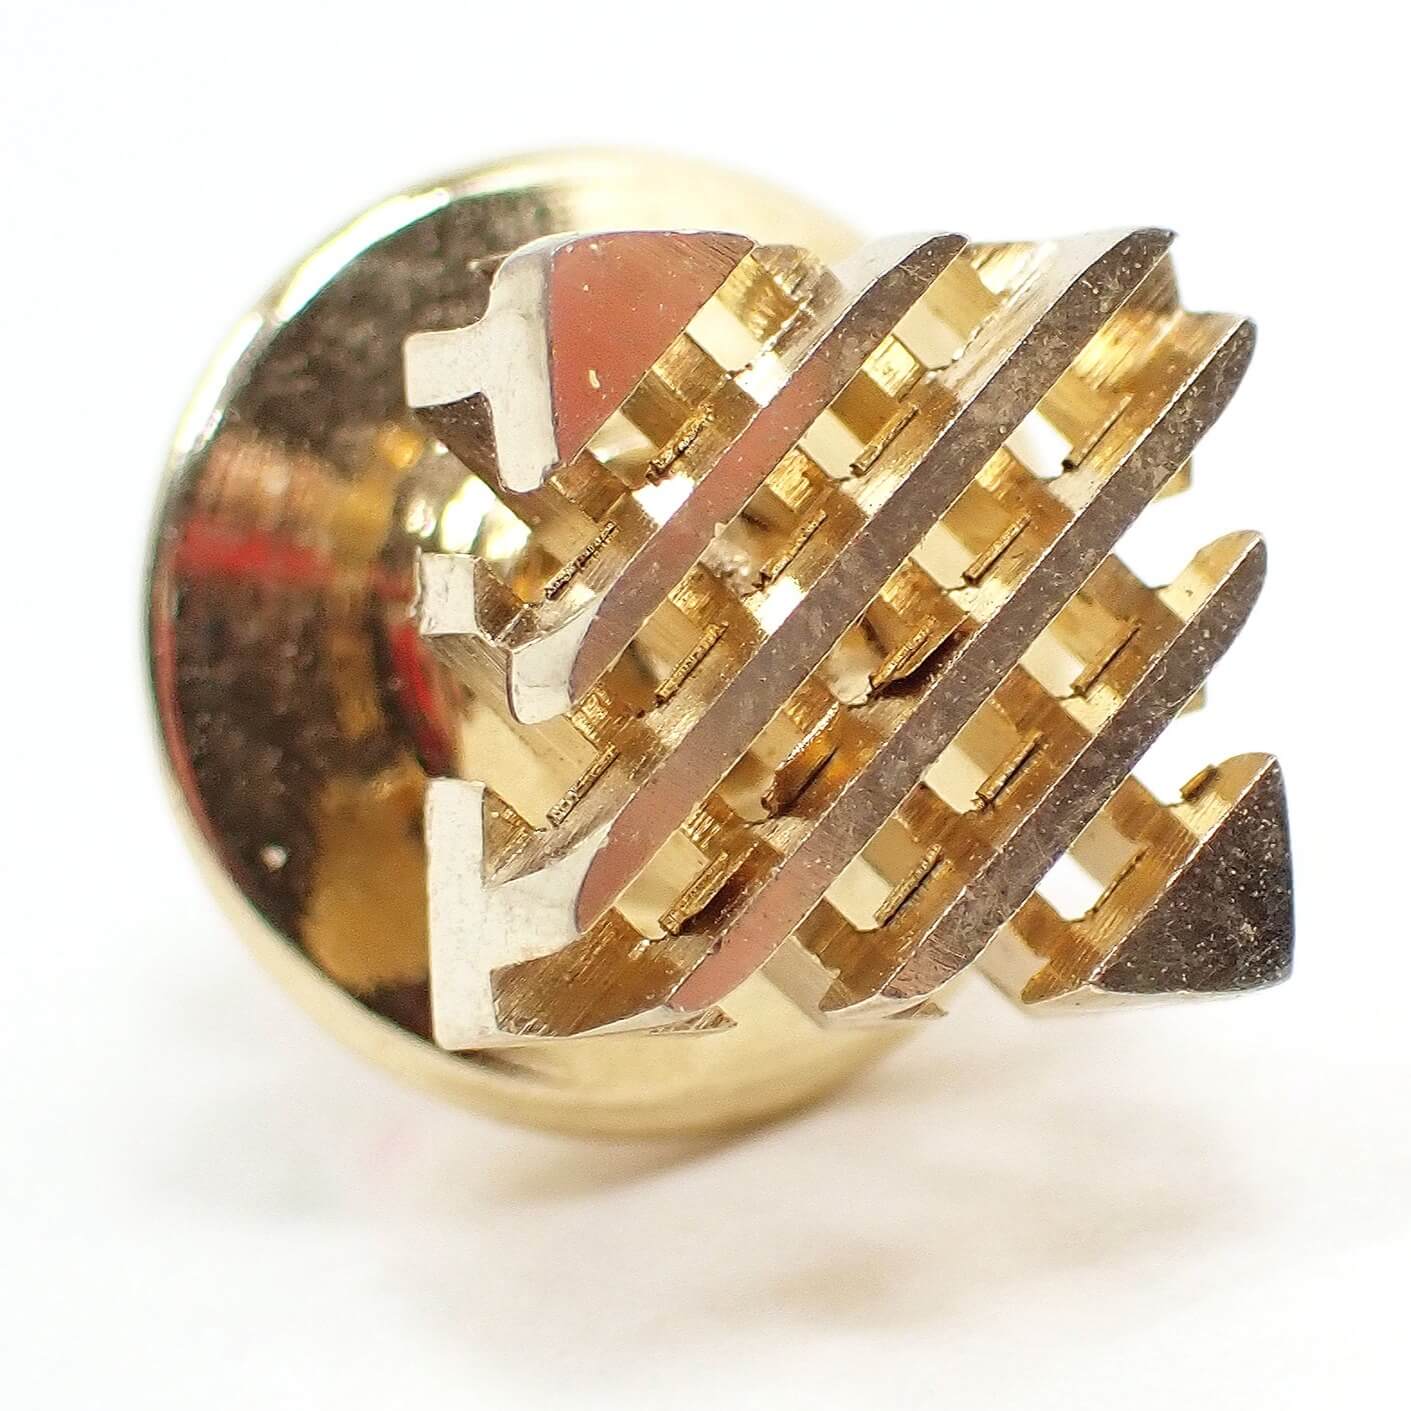 Enlarged angled view of the front of the retro vintage tie tack. It is gold tone in color. The tie tack is square with two layers of cut out diagonal lines. 